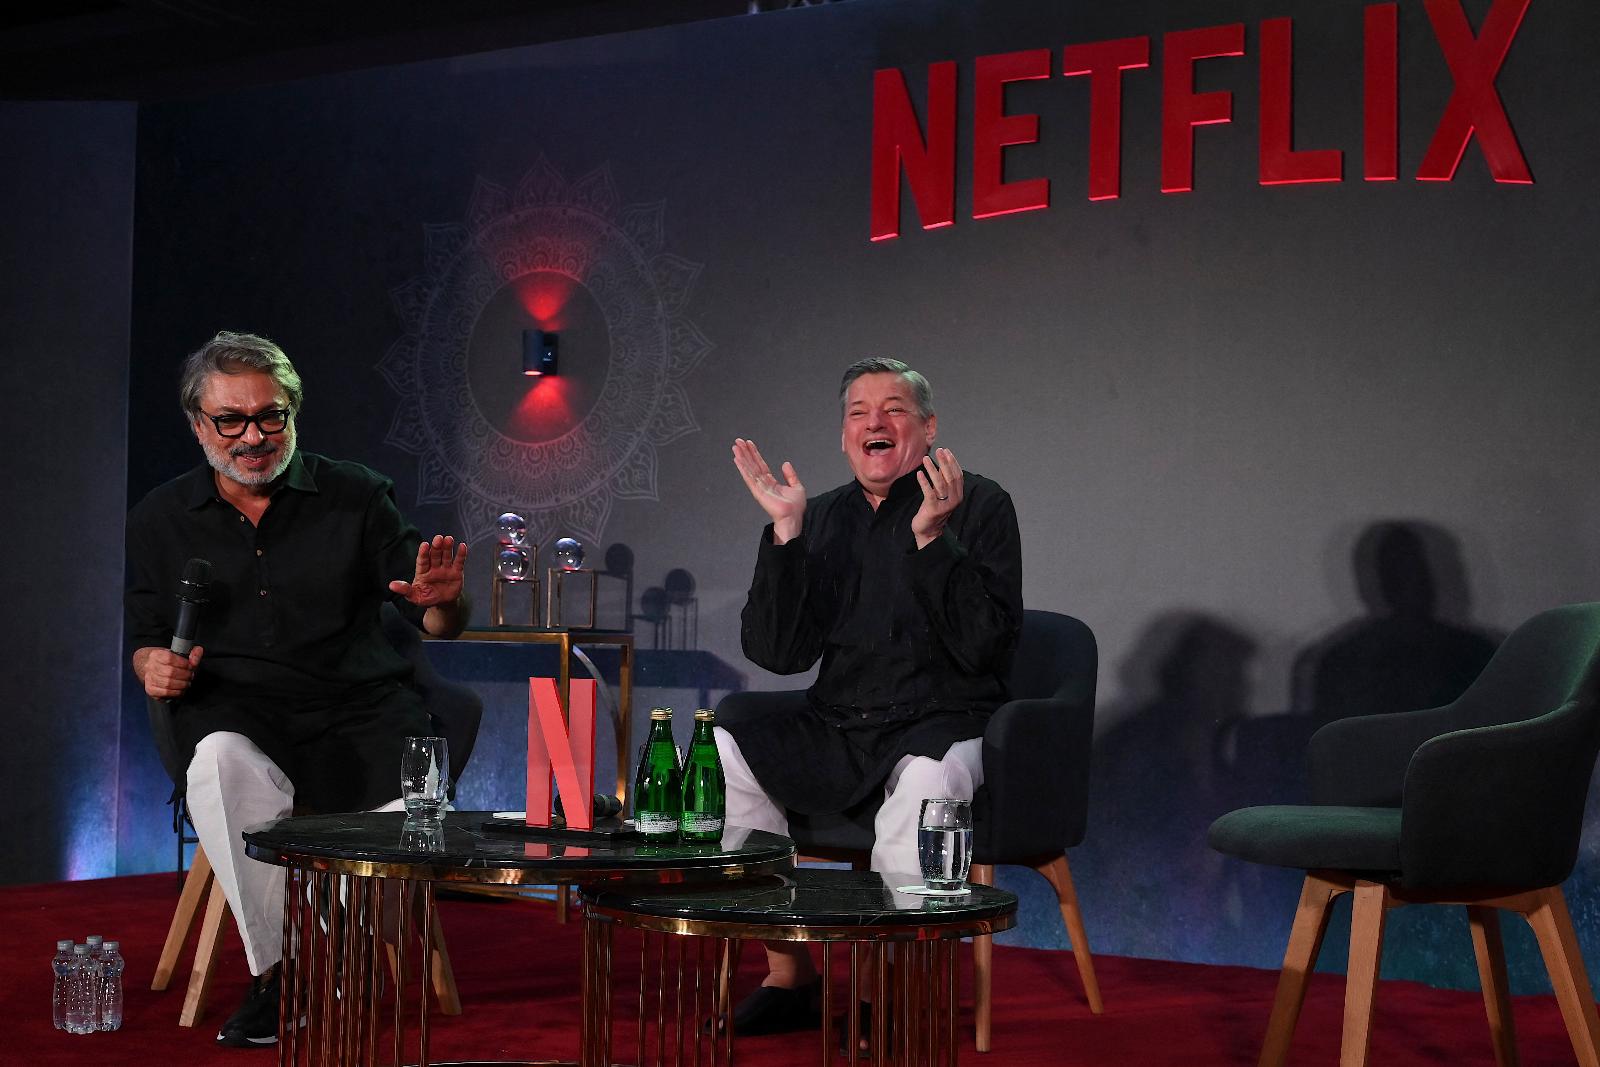 Netflix’s 6.5M India subscribers dwarfed by Prime Video and Disney, Bernstein says